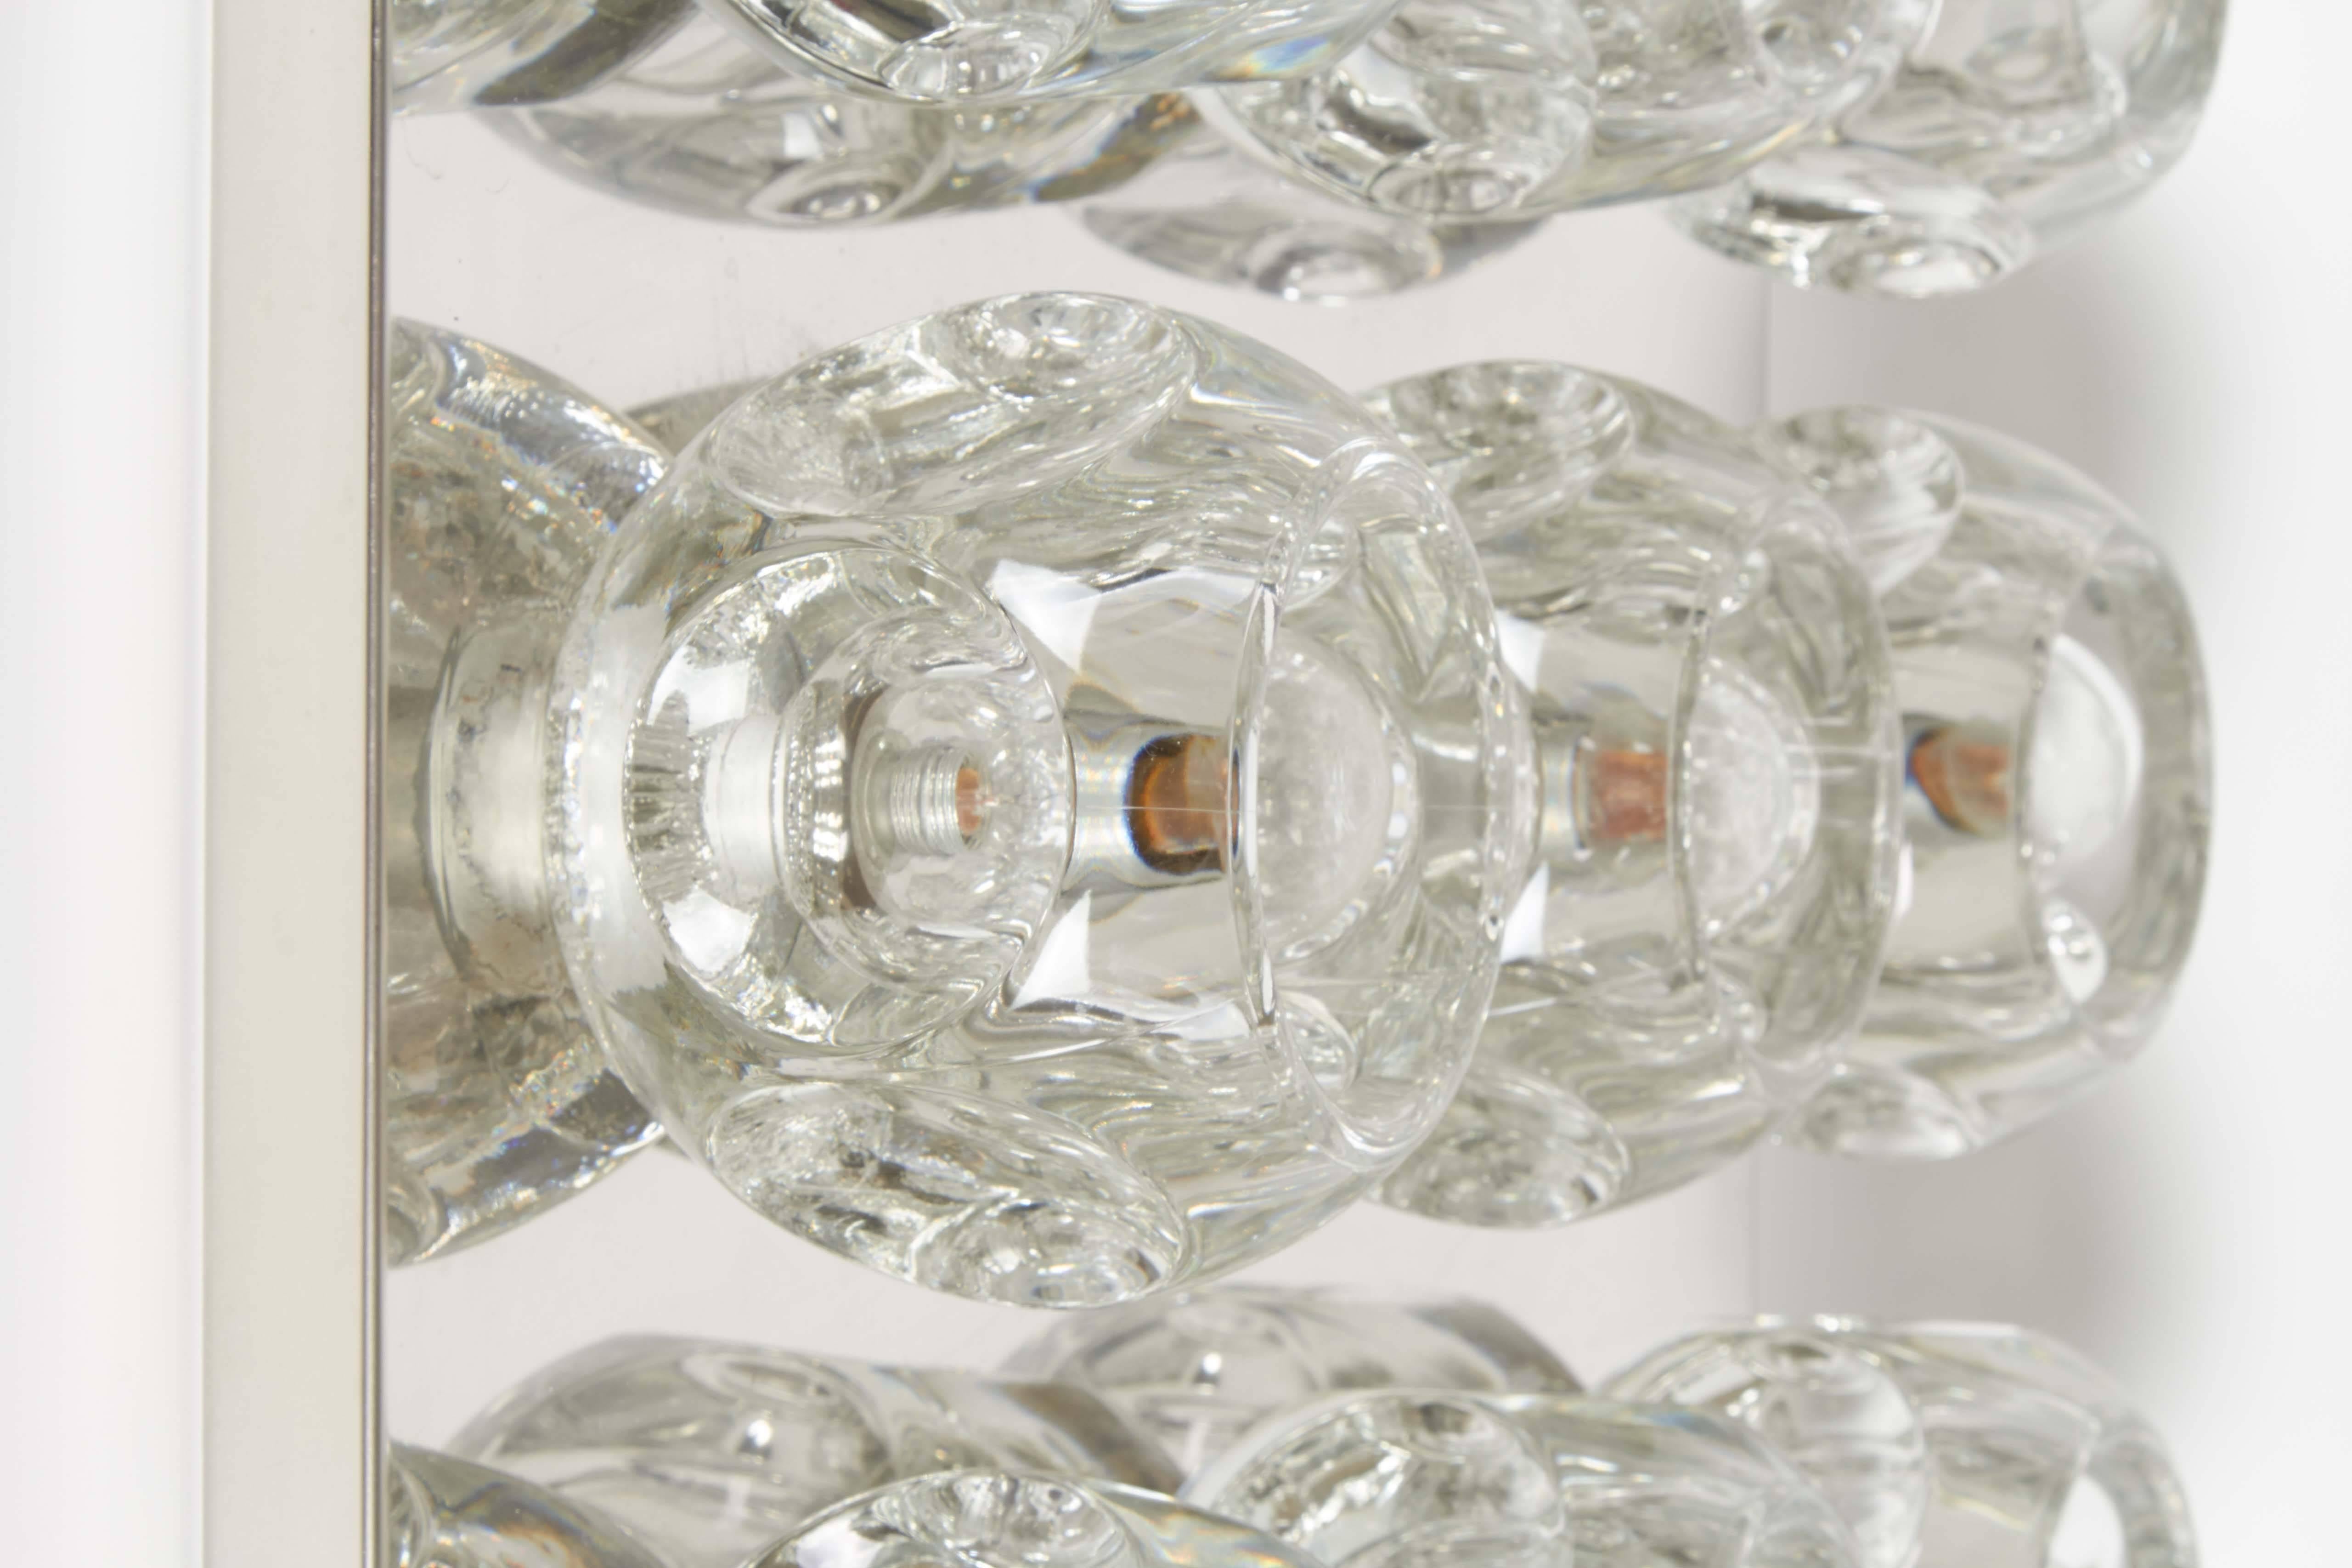 German Peill & Putzler Wall and Ceiling Light Fixture in Chrome with Faceted Glass